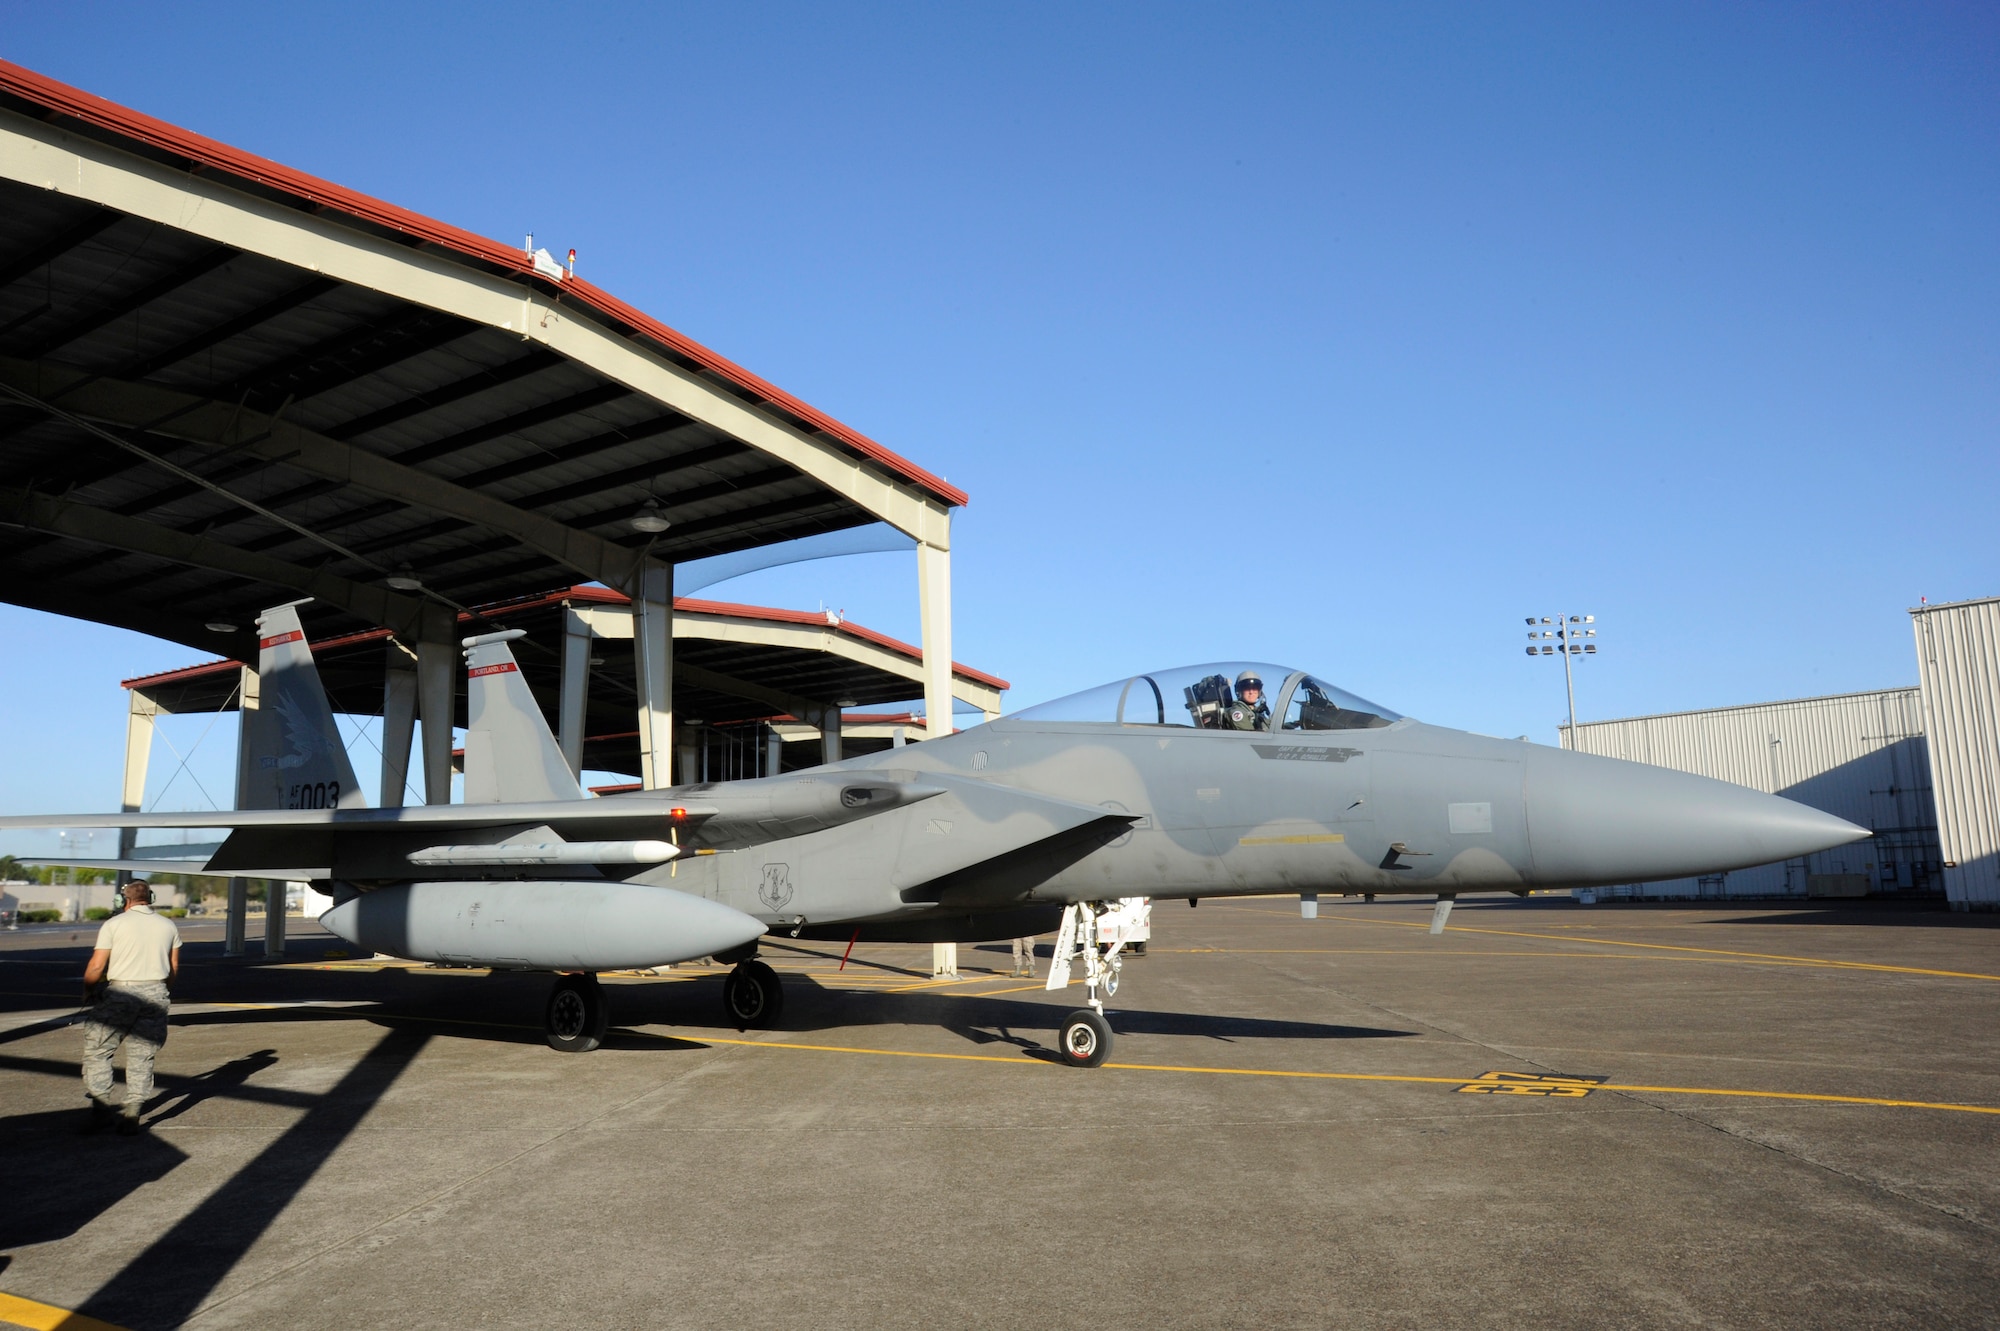 An F-15 Eagle from the 142nd Fighter Wing begins to taxi out of the new aircraft shelter recently constructed at the Portland Air National Guard Base, Ore., Sept. 4, 2014. (U.S. Air National Guard photo by Tech. Sgt. John Hughel, 142nd Fighter Wing Public Affairs/Released)